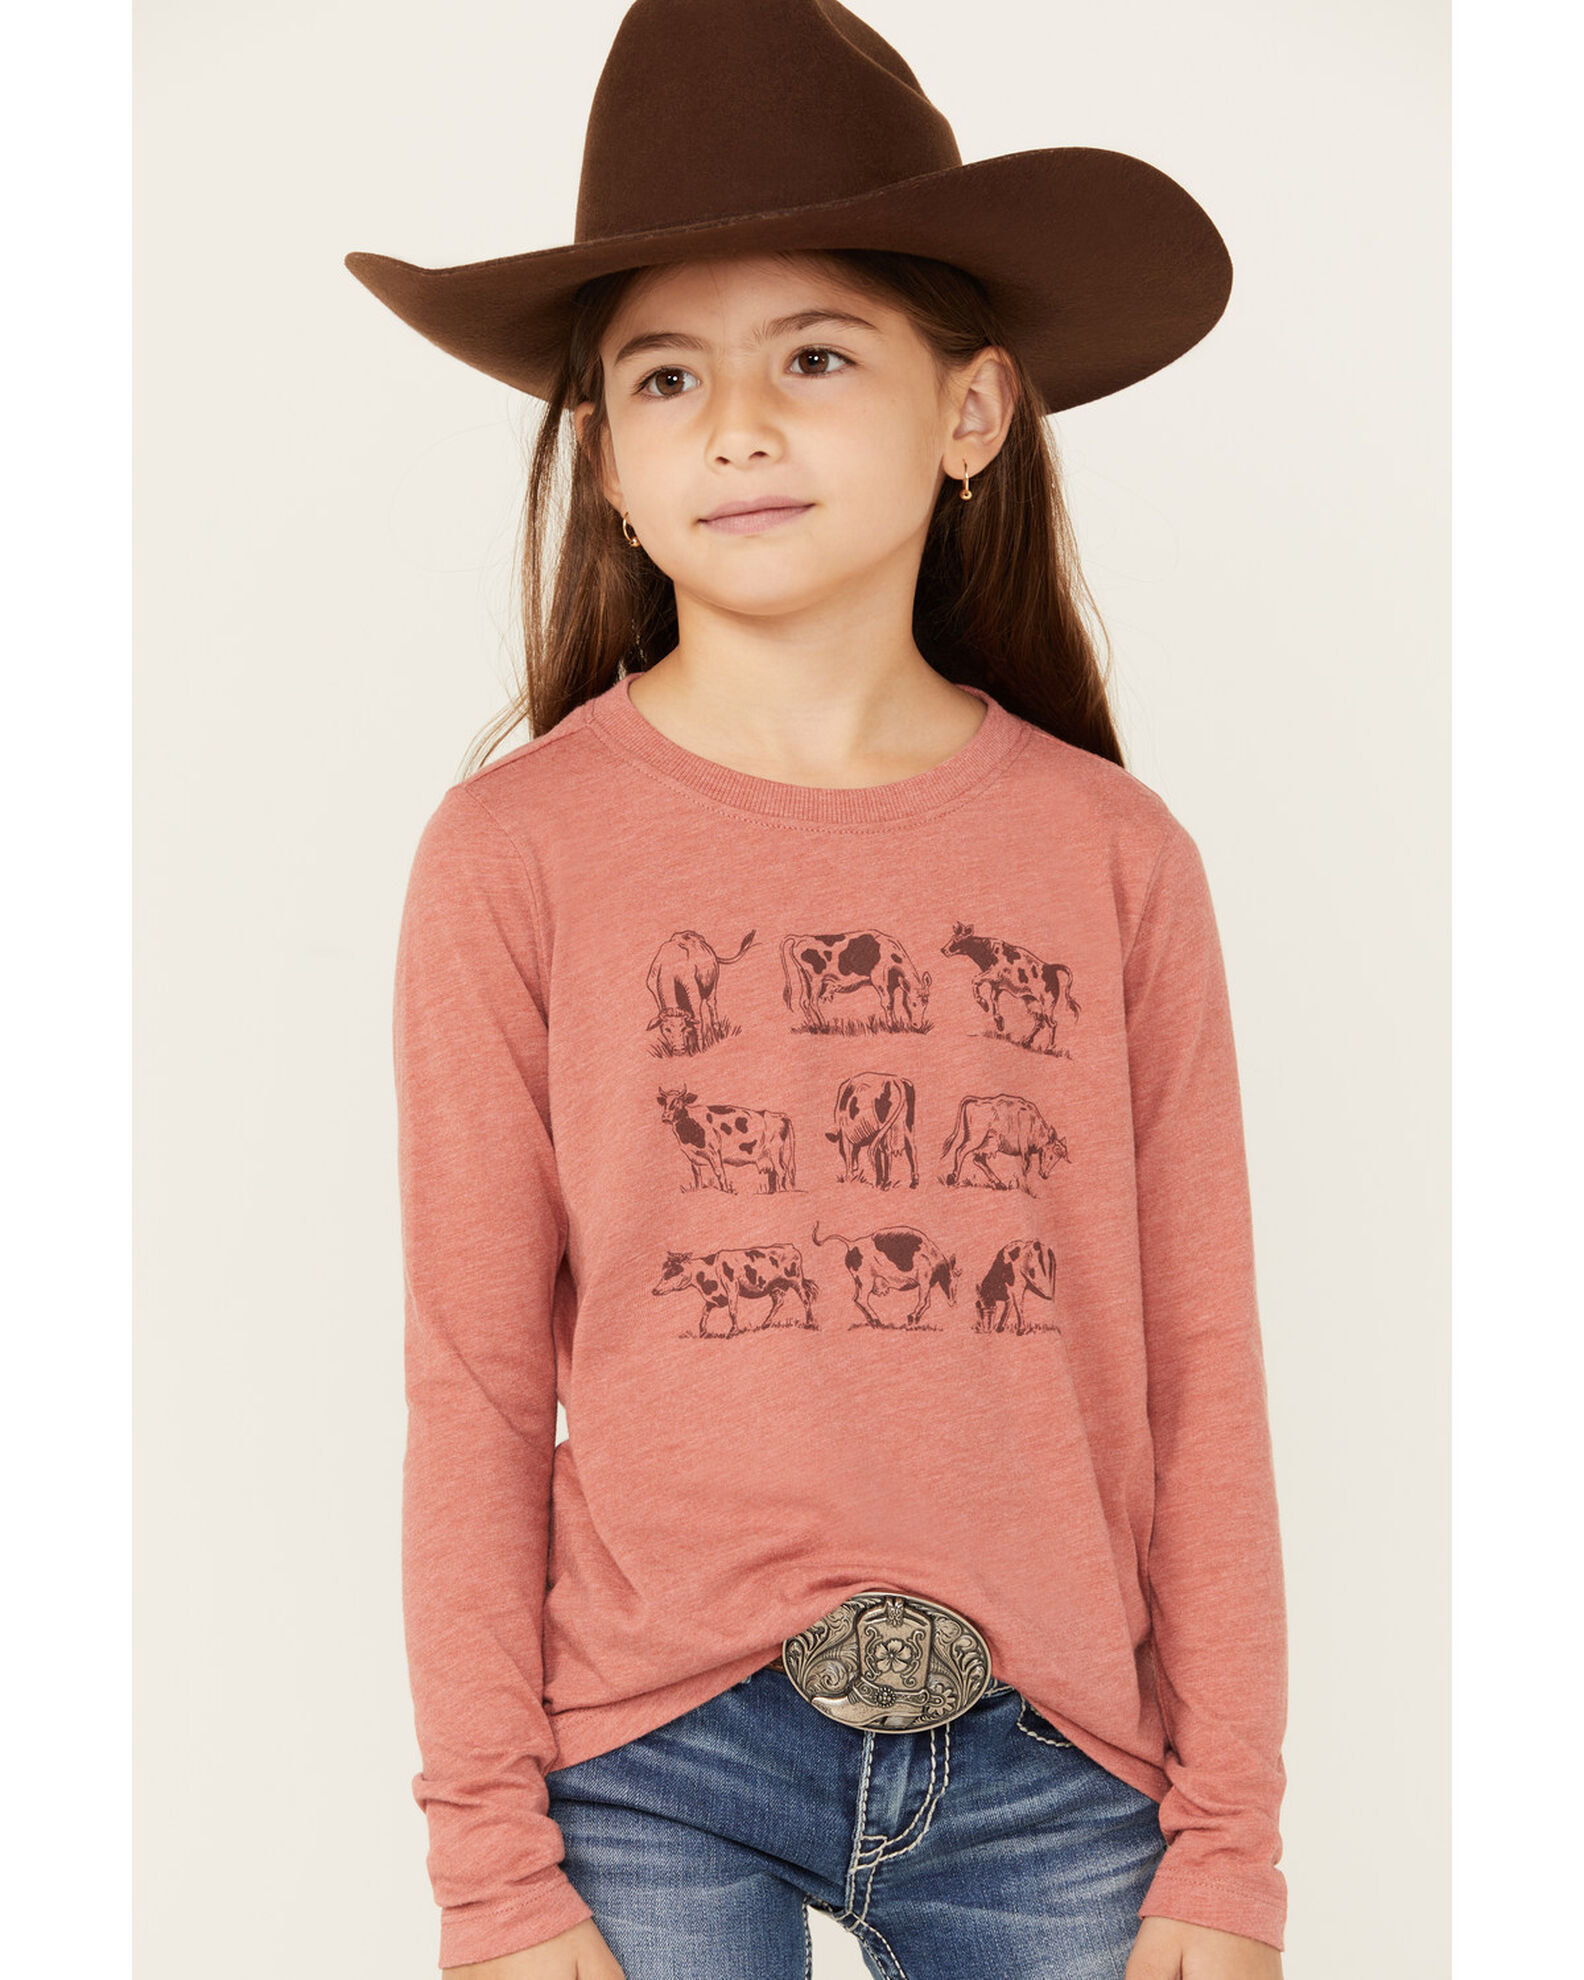 Shyanne Girls' Grazing Cows Long Sleeve Graphic Tee